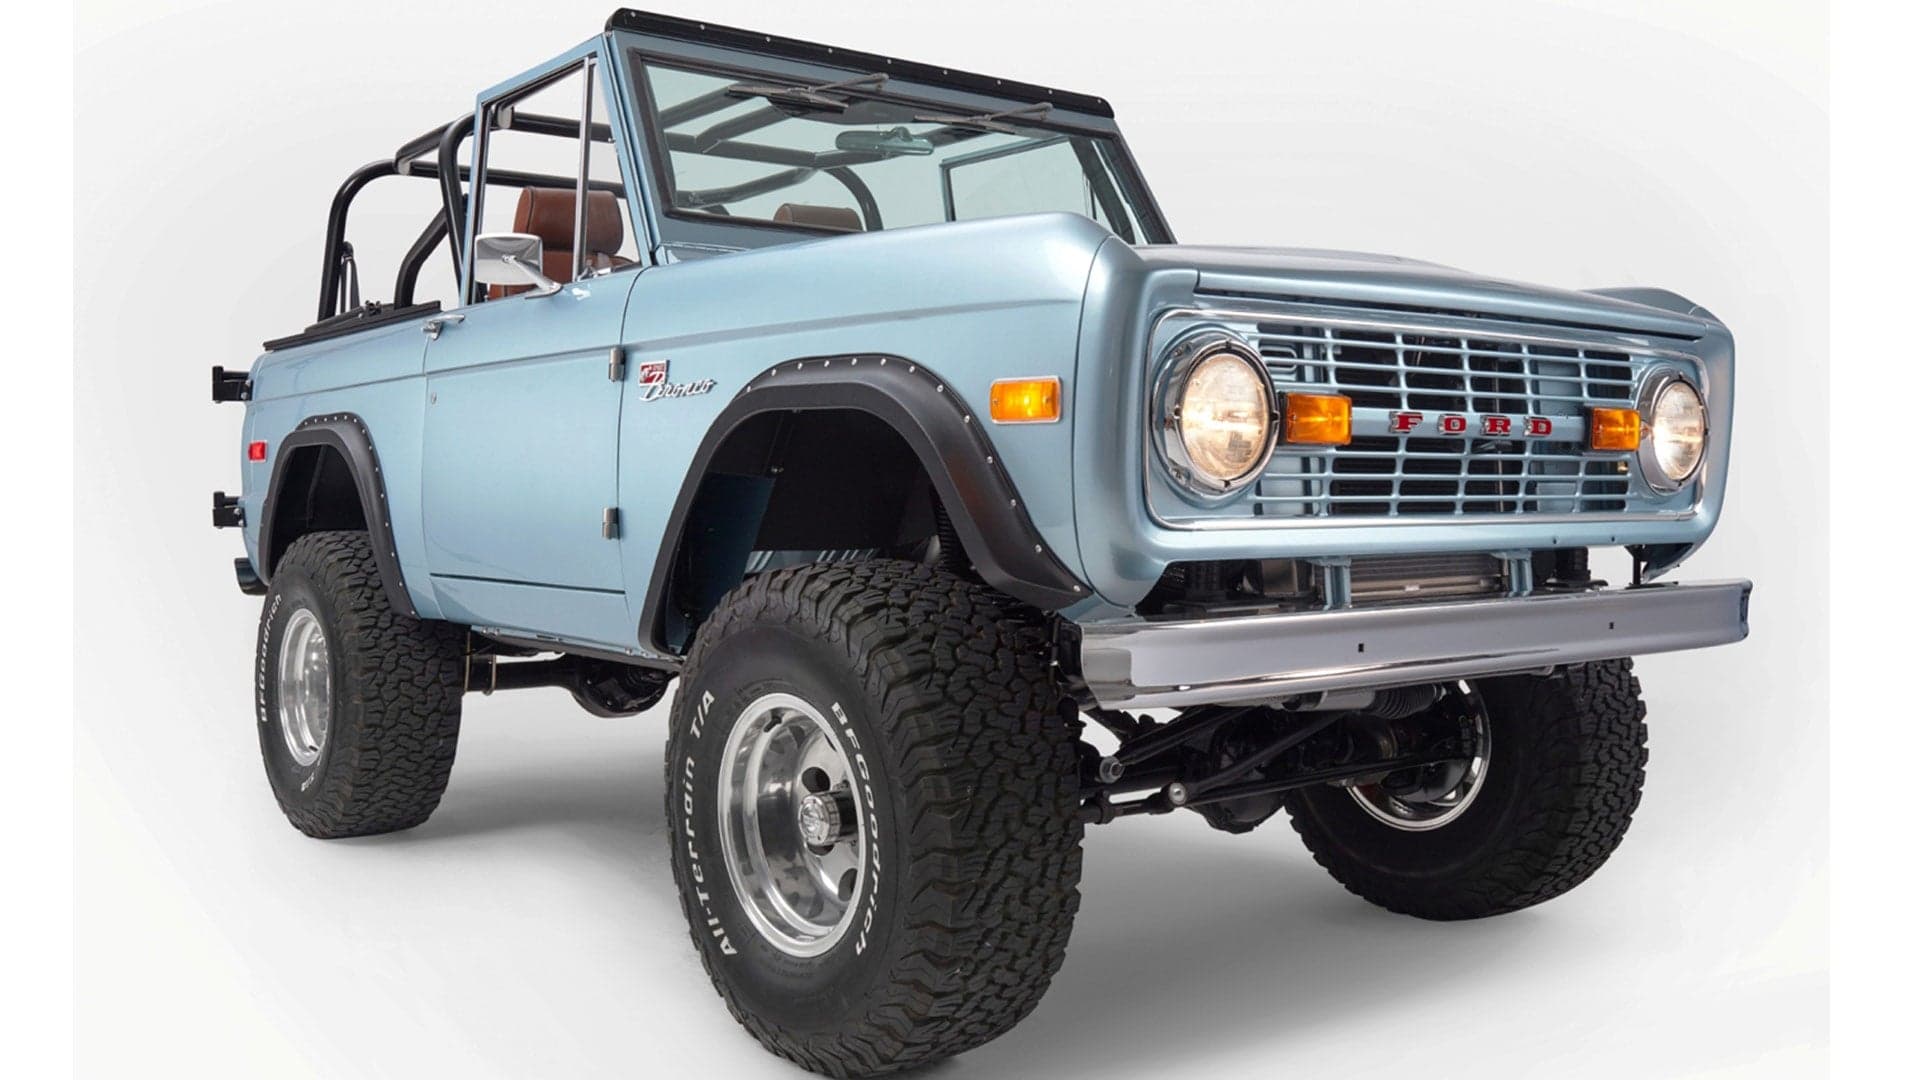 Would You Buy a $200,000 1971 Bronco from Classic Ford Broncos?